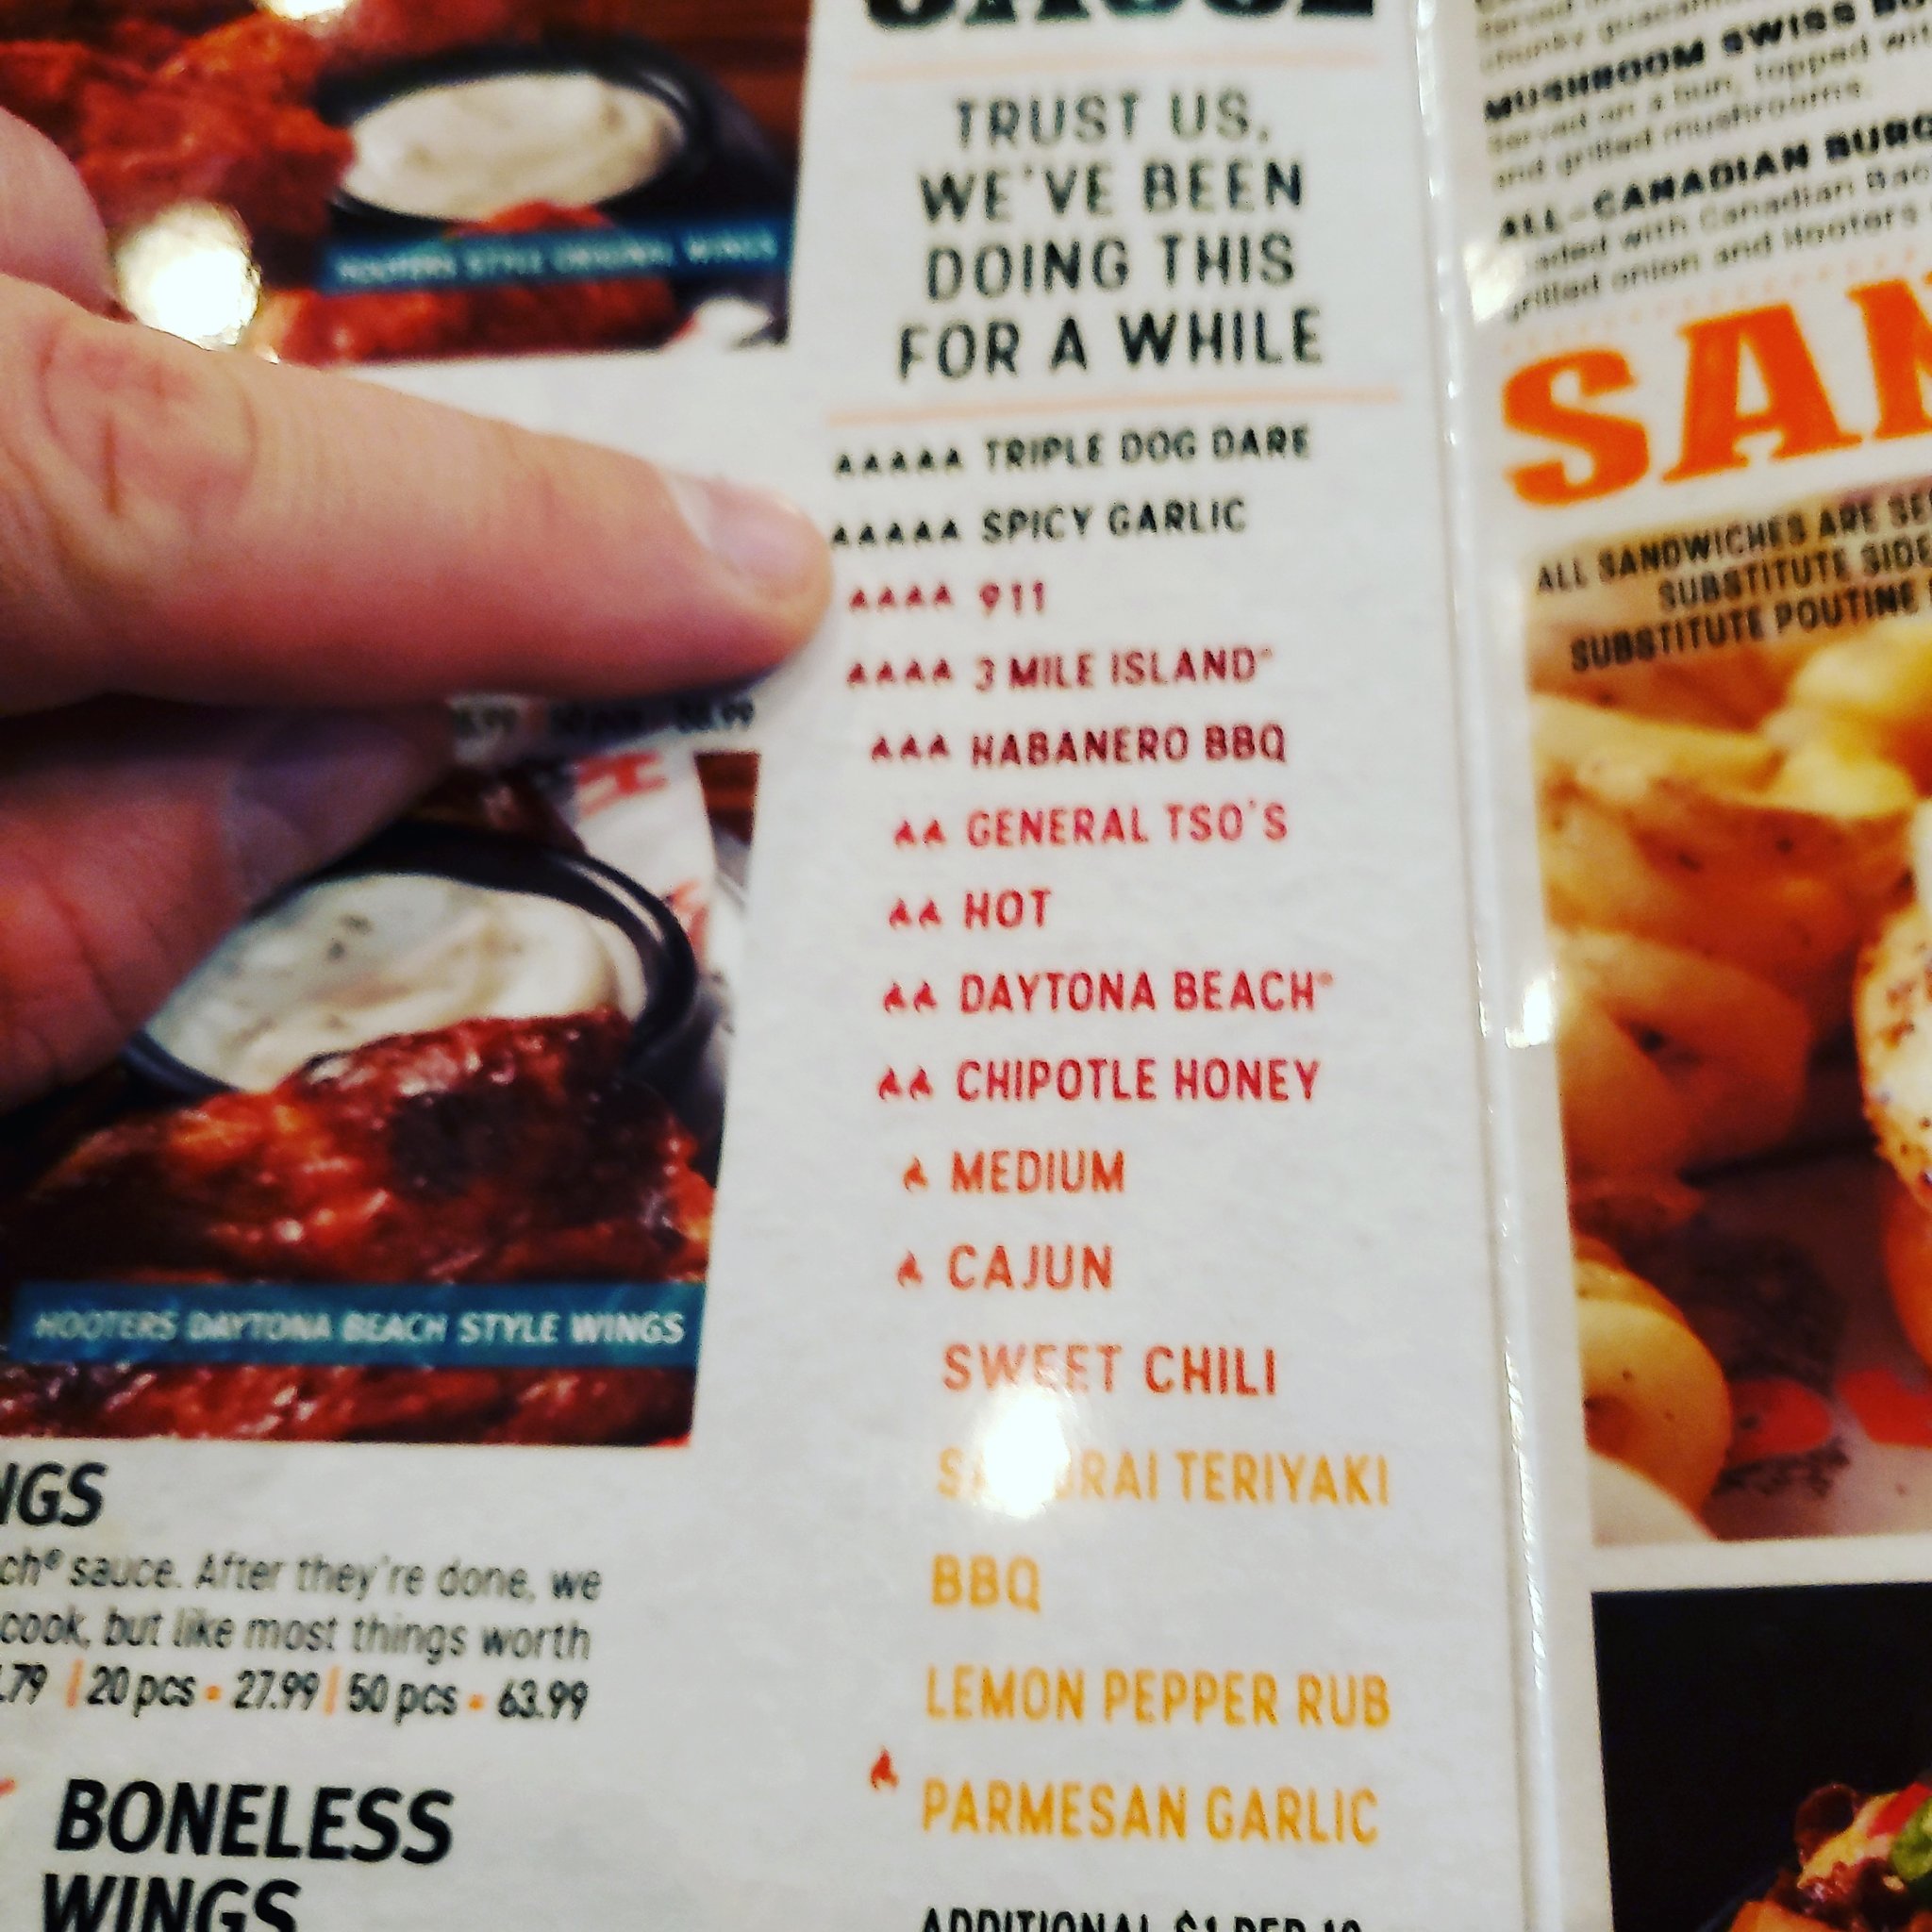 hooters wing sauces ranked